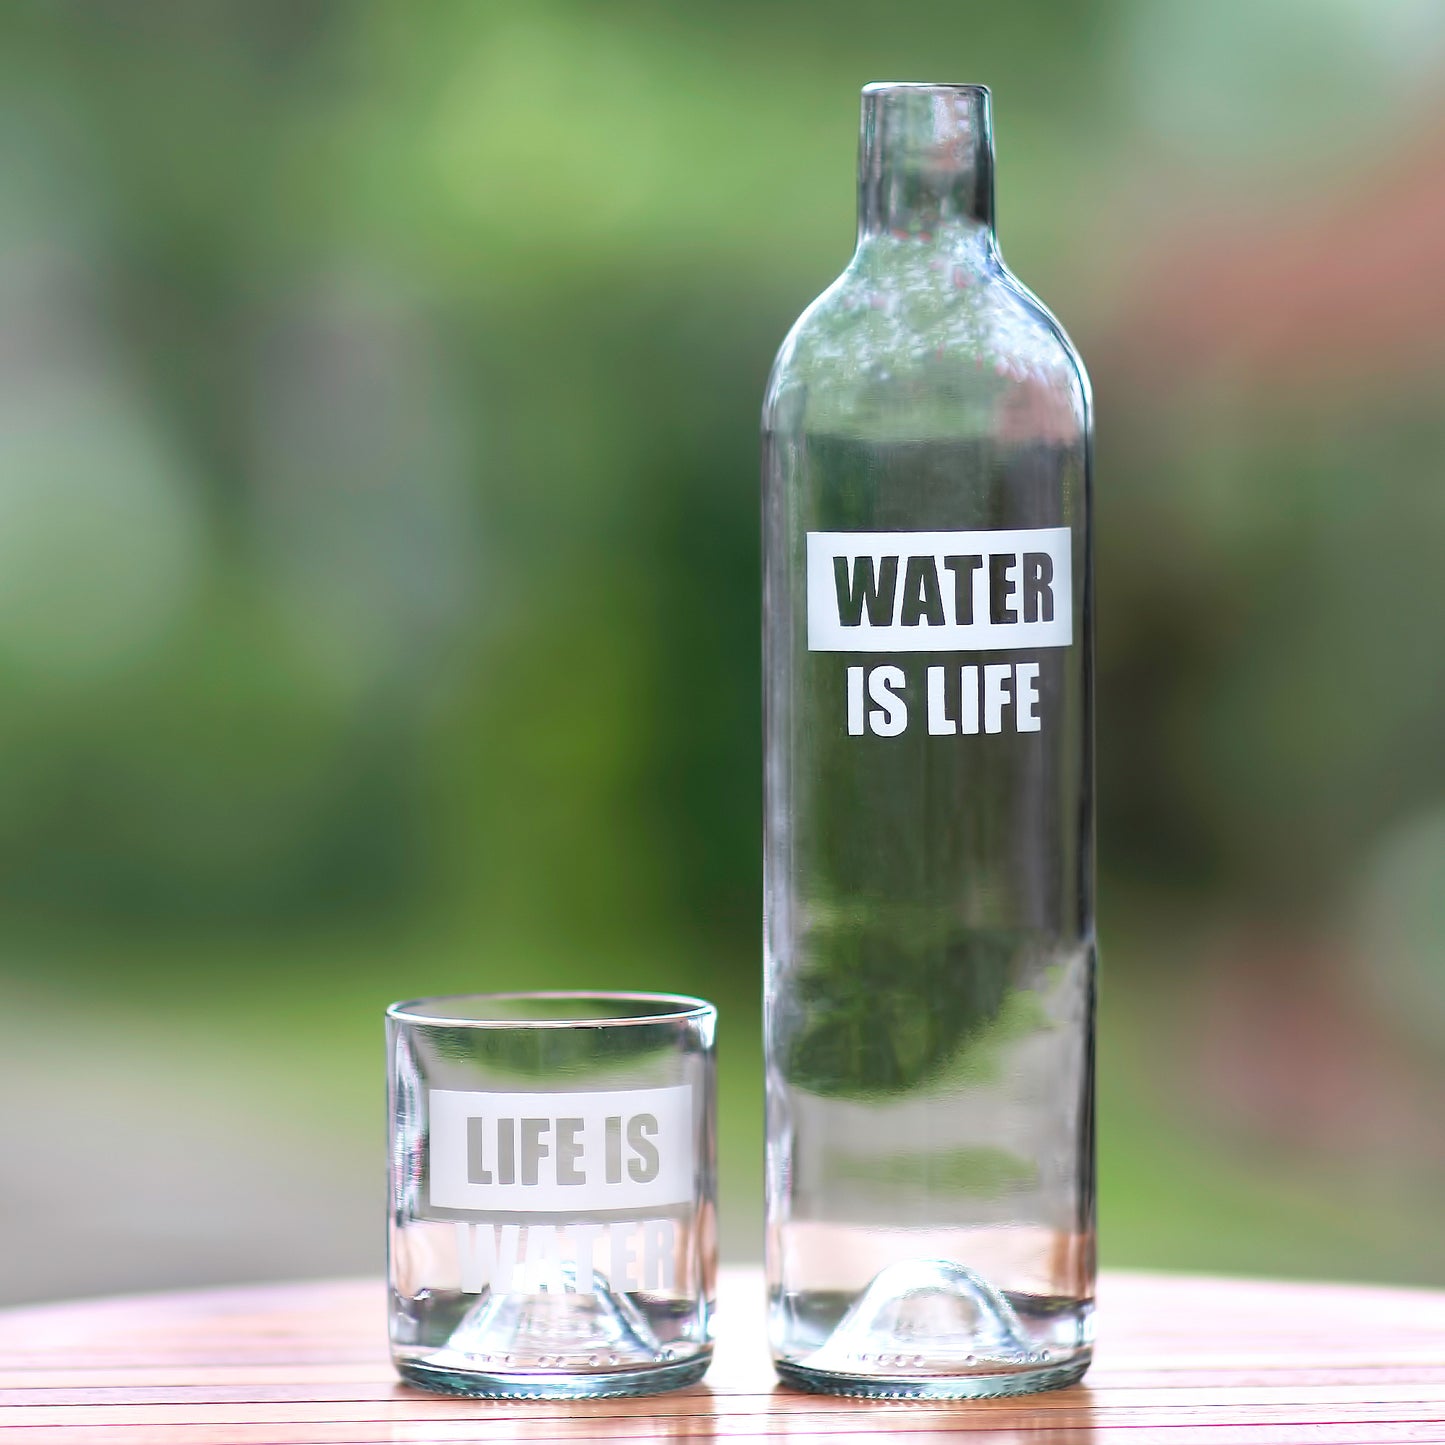 Water is Life Upcycled Bottle Carafe and Glass Set Crafted in Bali